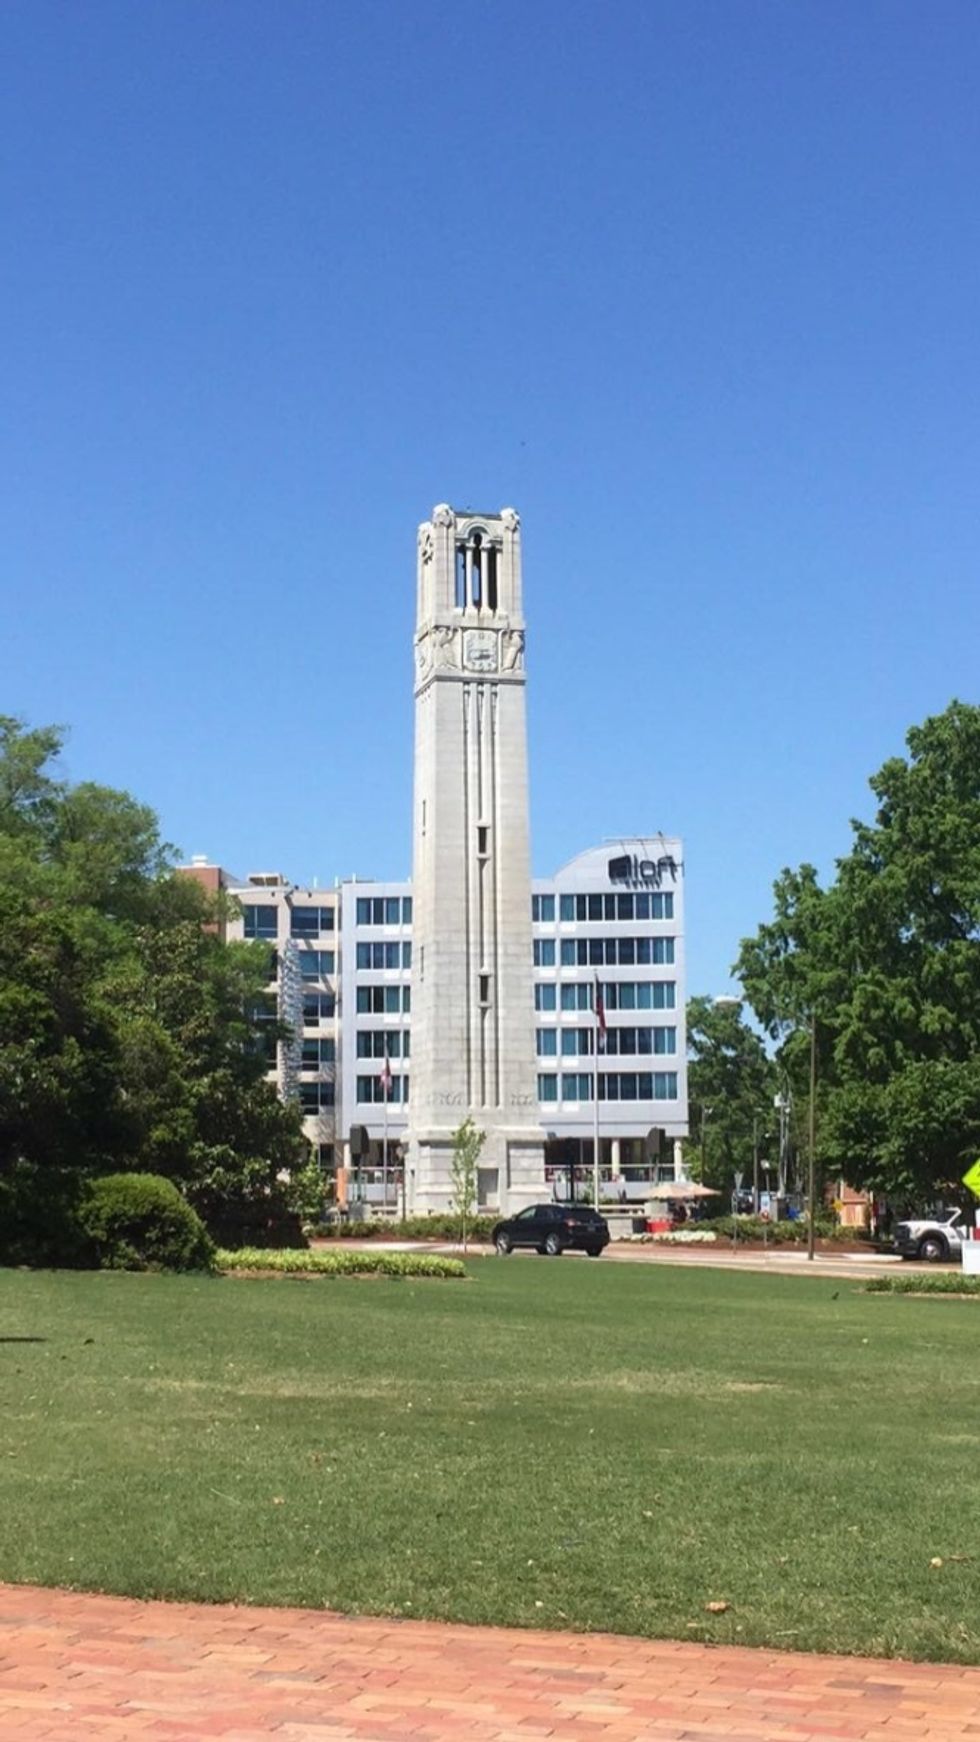 10 Signs That You Are An Engineering Major At NCSU